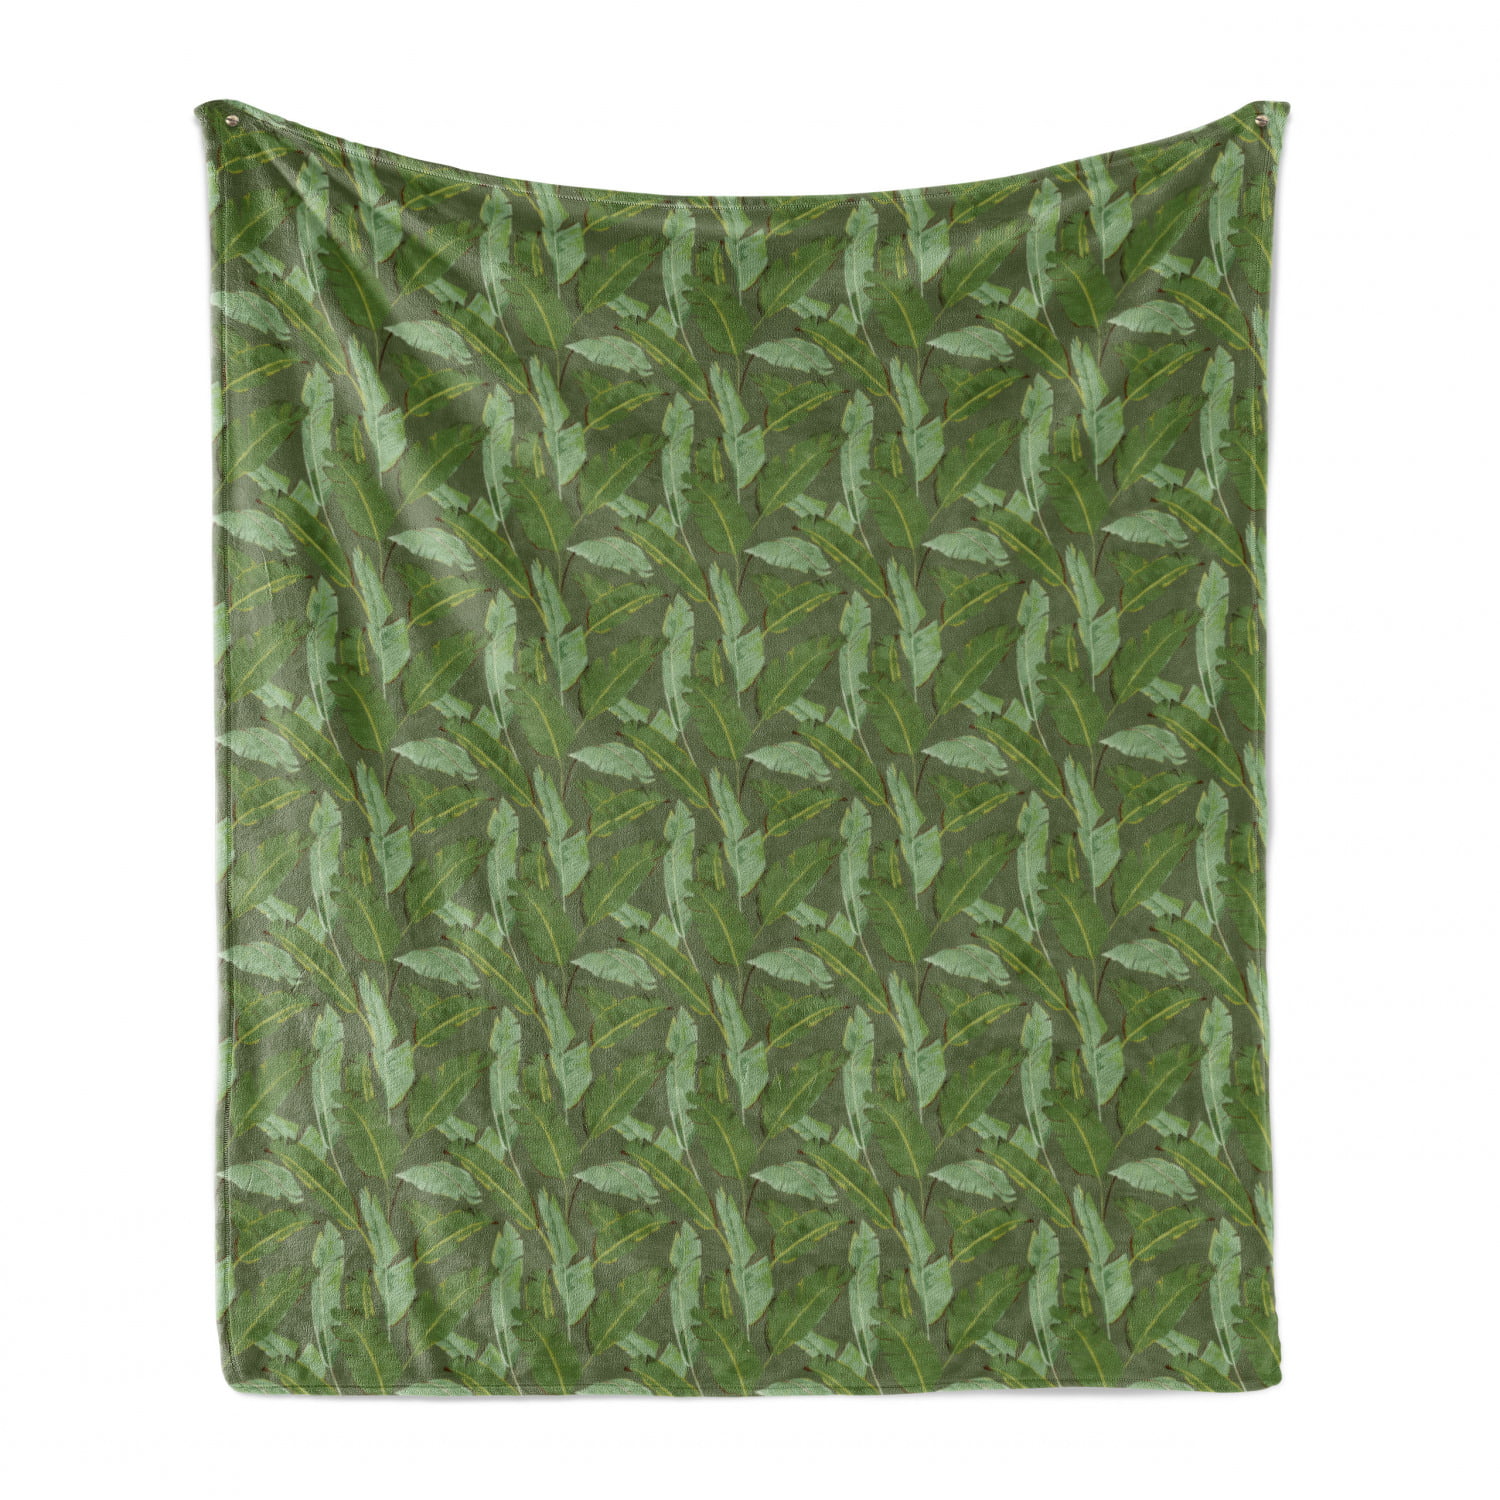 Fleece Flannel Throw Blanket Light-Weight Air-Conditioned Quilts Natural Material Fluffy Blanket Bananas On Green Pattern Bed Throws for Sofa Bed 60 x 80 Inches 